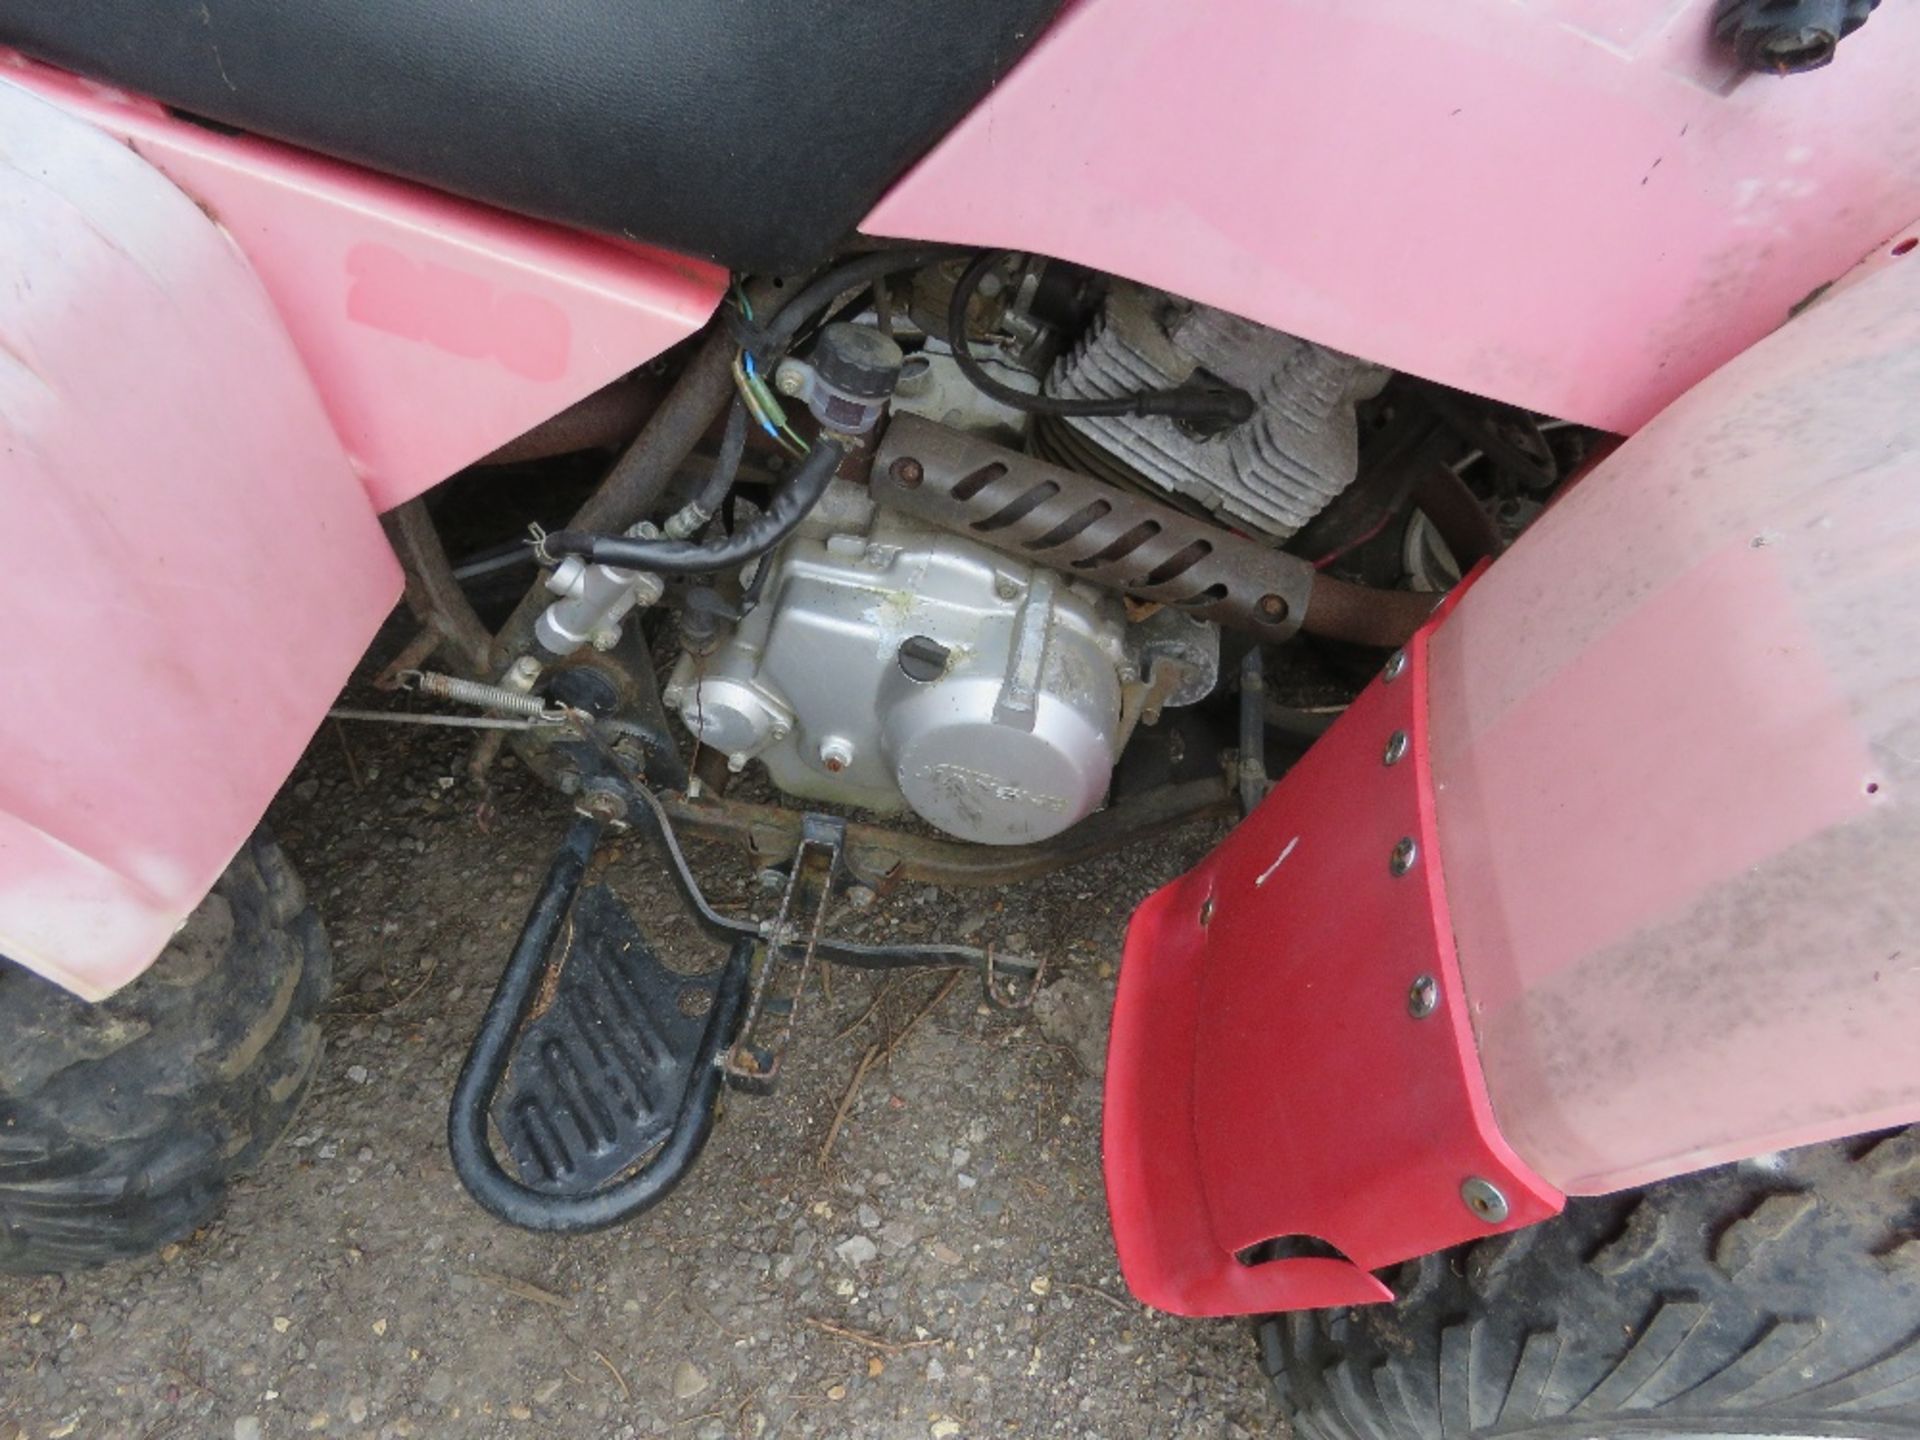 JIANSHE 2WD PETROL ENGINED QUAD BIKE, CONDITION UNKNOWN, SOLD AS NON RUNNER. - Image 6 of 7